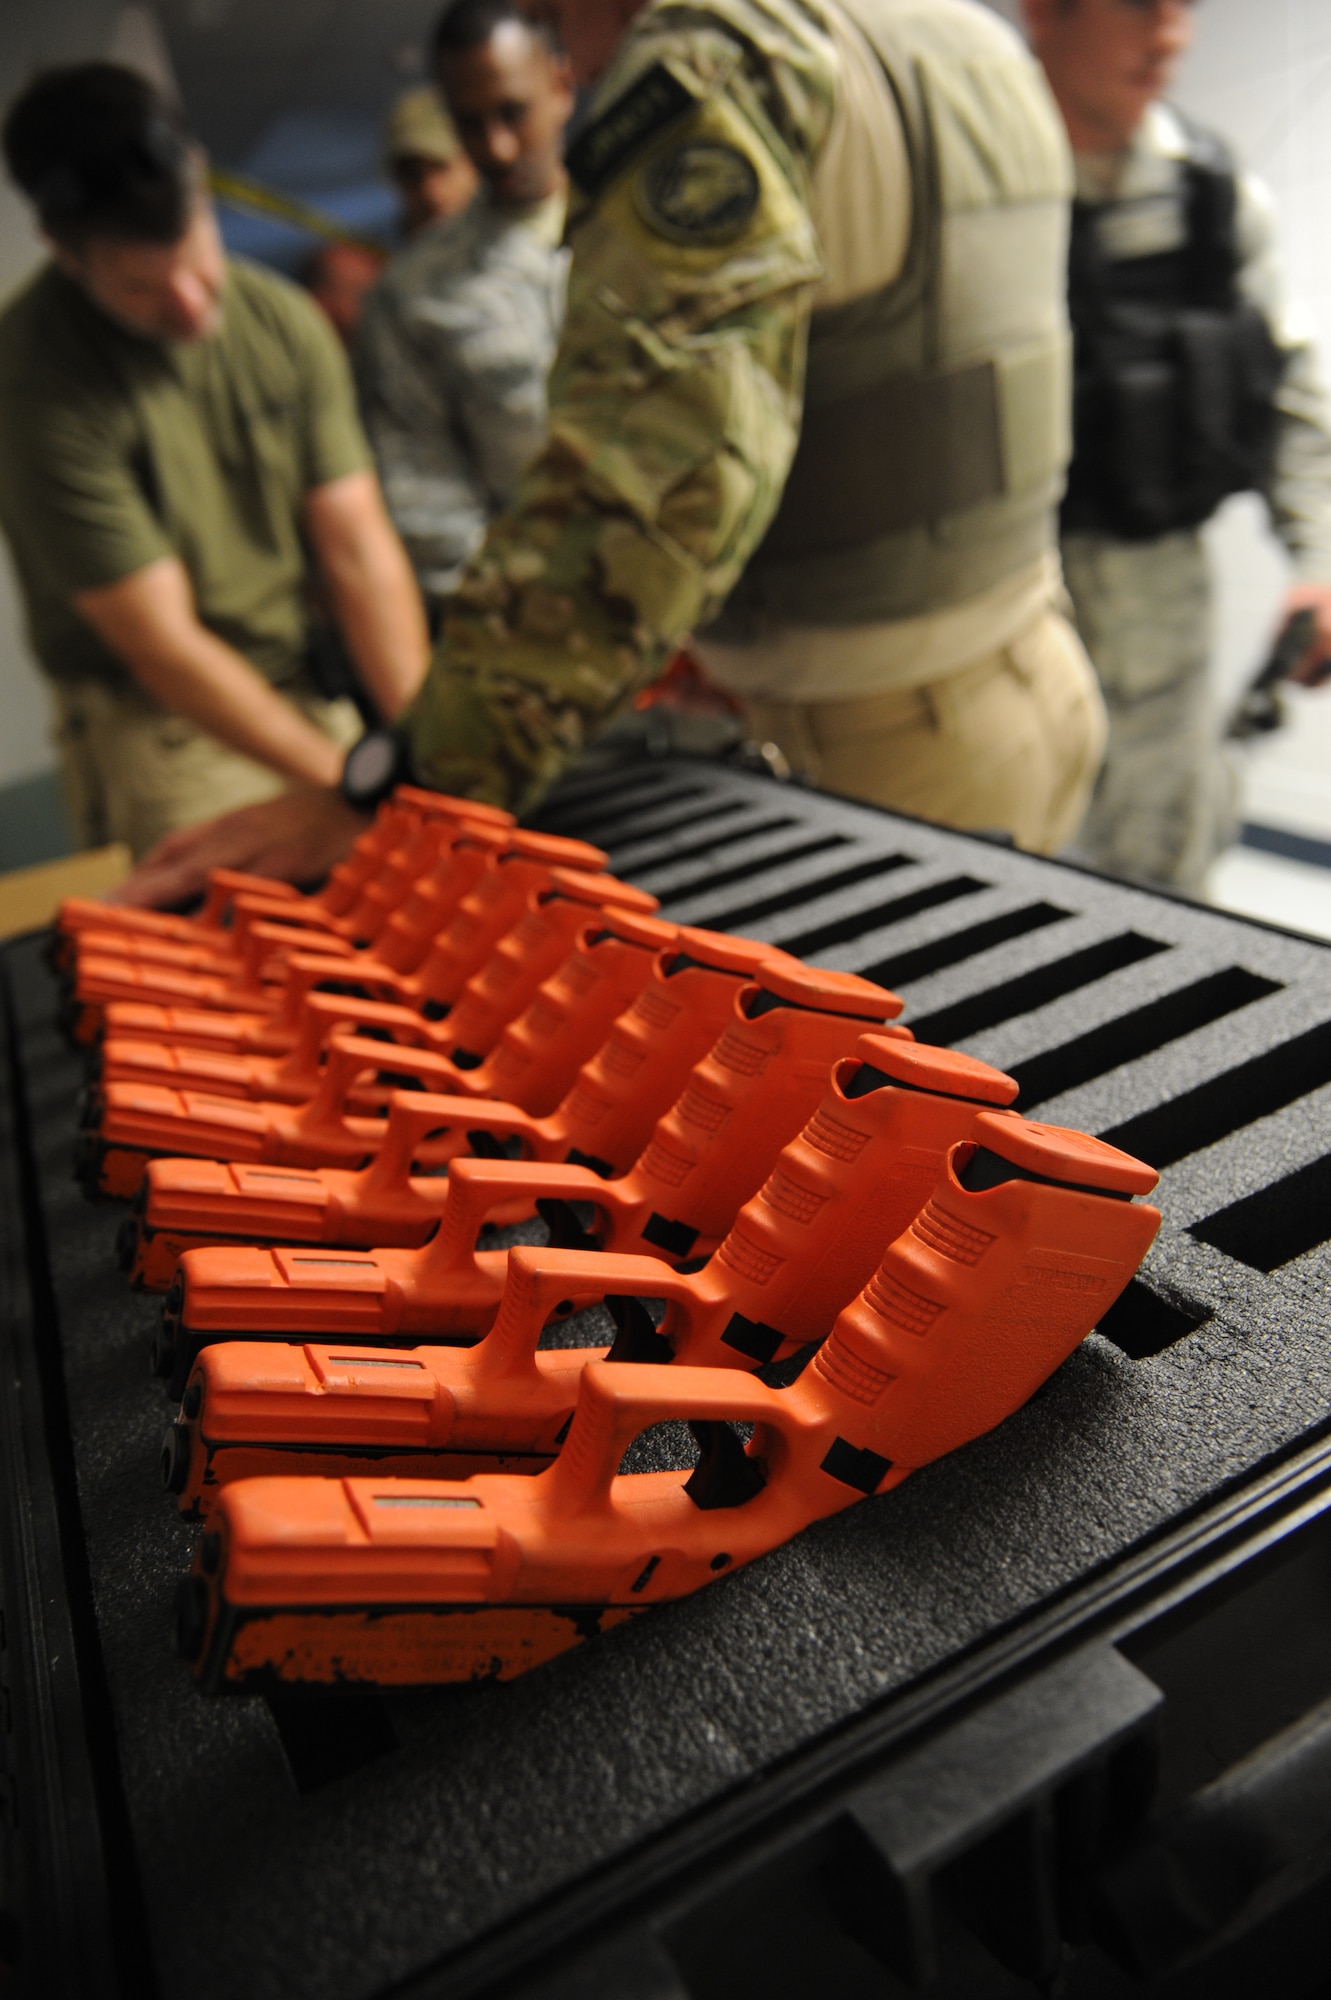 Training weapons sit on display while being assigned to trainees during an active shooter training session hosted by the Federal Bureau of Investigation May 21, 2014, at The Locker House, Keesler Air Force Base, Miss.  The two-day Advanced Law Enforcement Rapid Response Training focused on terrorism response tactics, which is designed to prepare the first responder to isolate, distract, and neutralize an "active shooter."  (U.S. Air Force photo by Kemberly Groue)